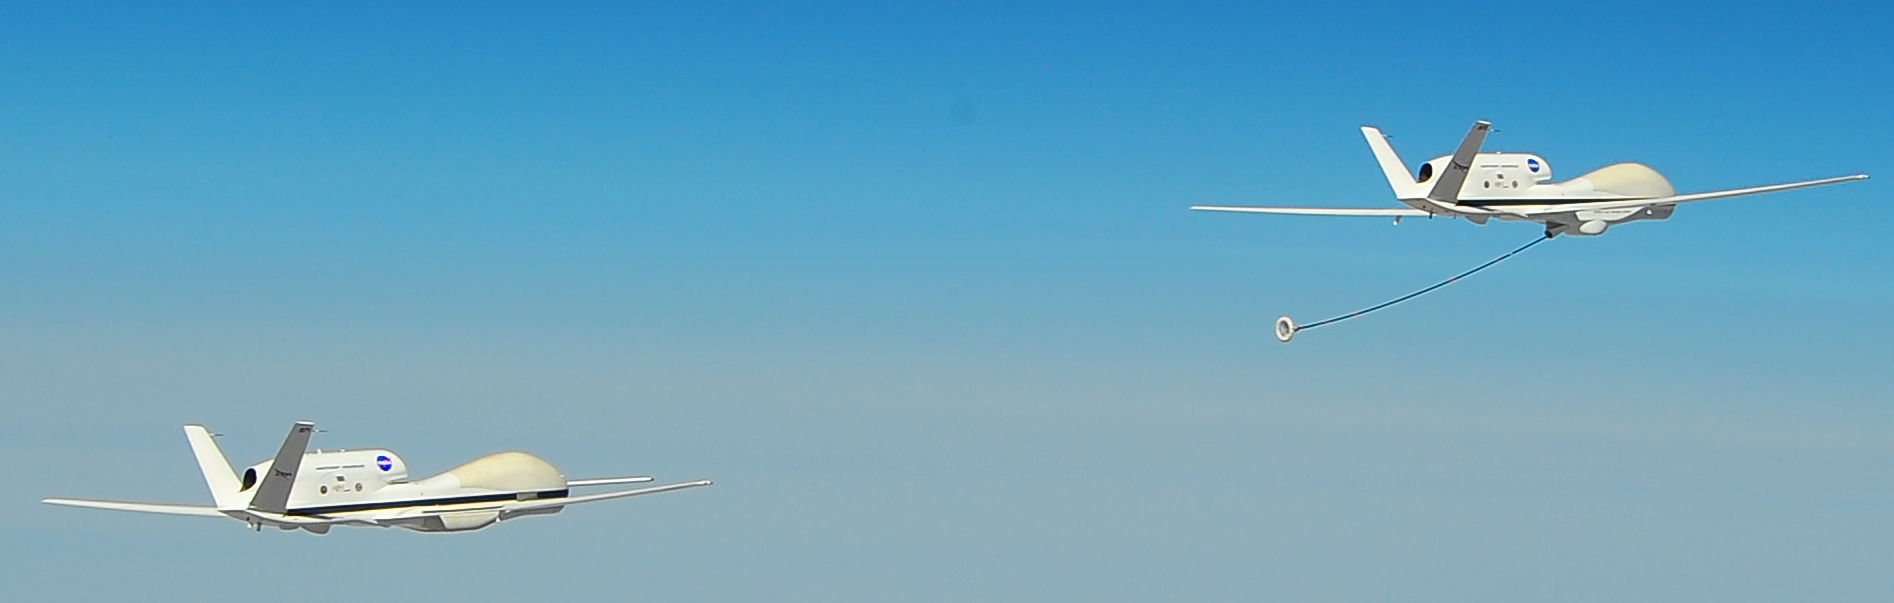 NASA's two Global Hawk unmanned aircraft, one with a refueling hose trailing behind, fly in close formation.